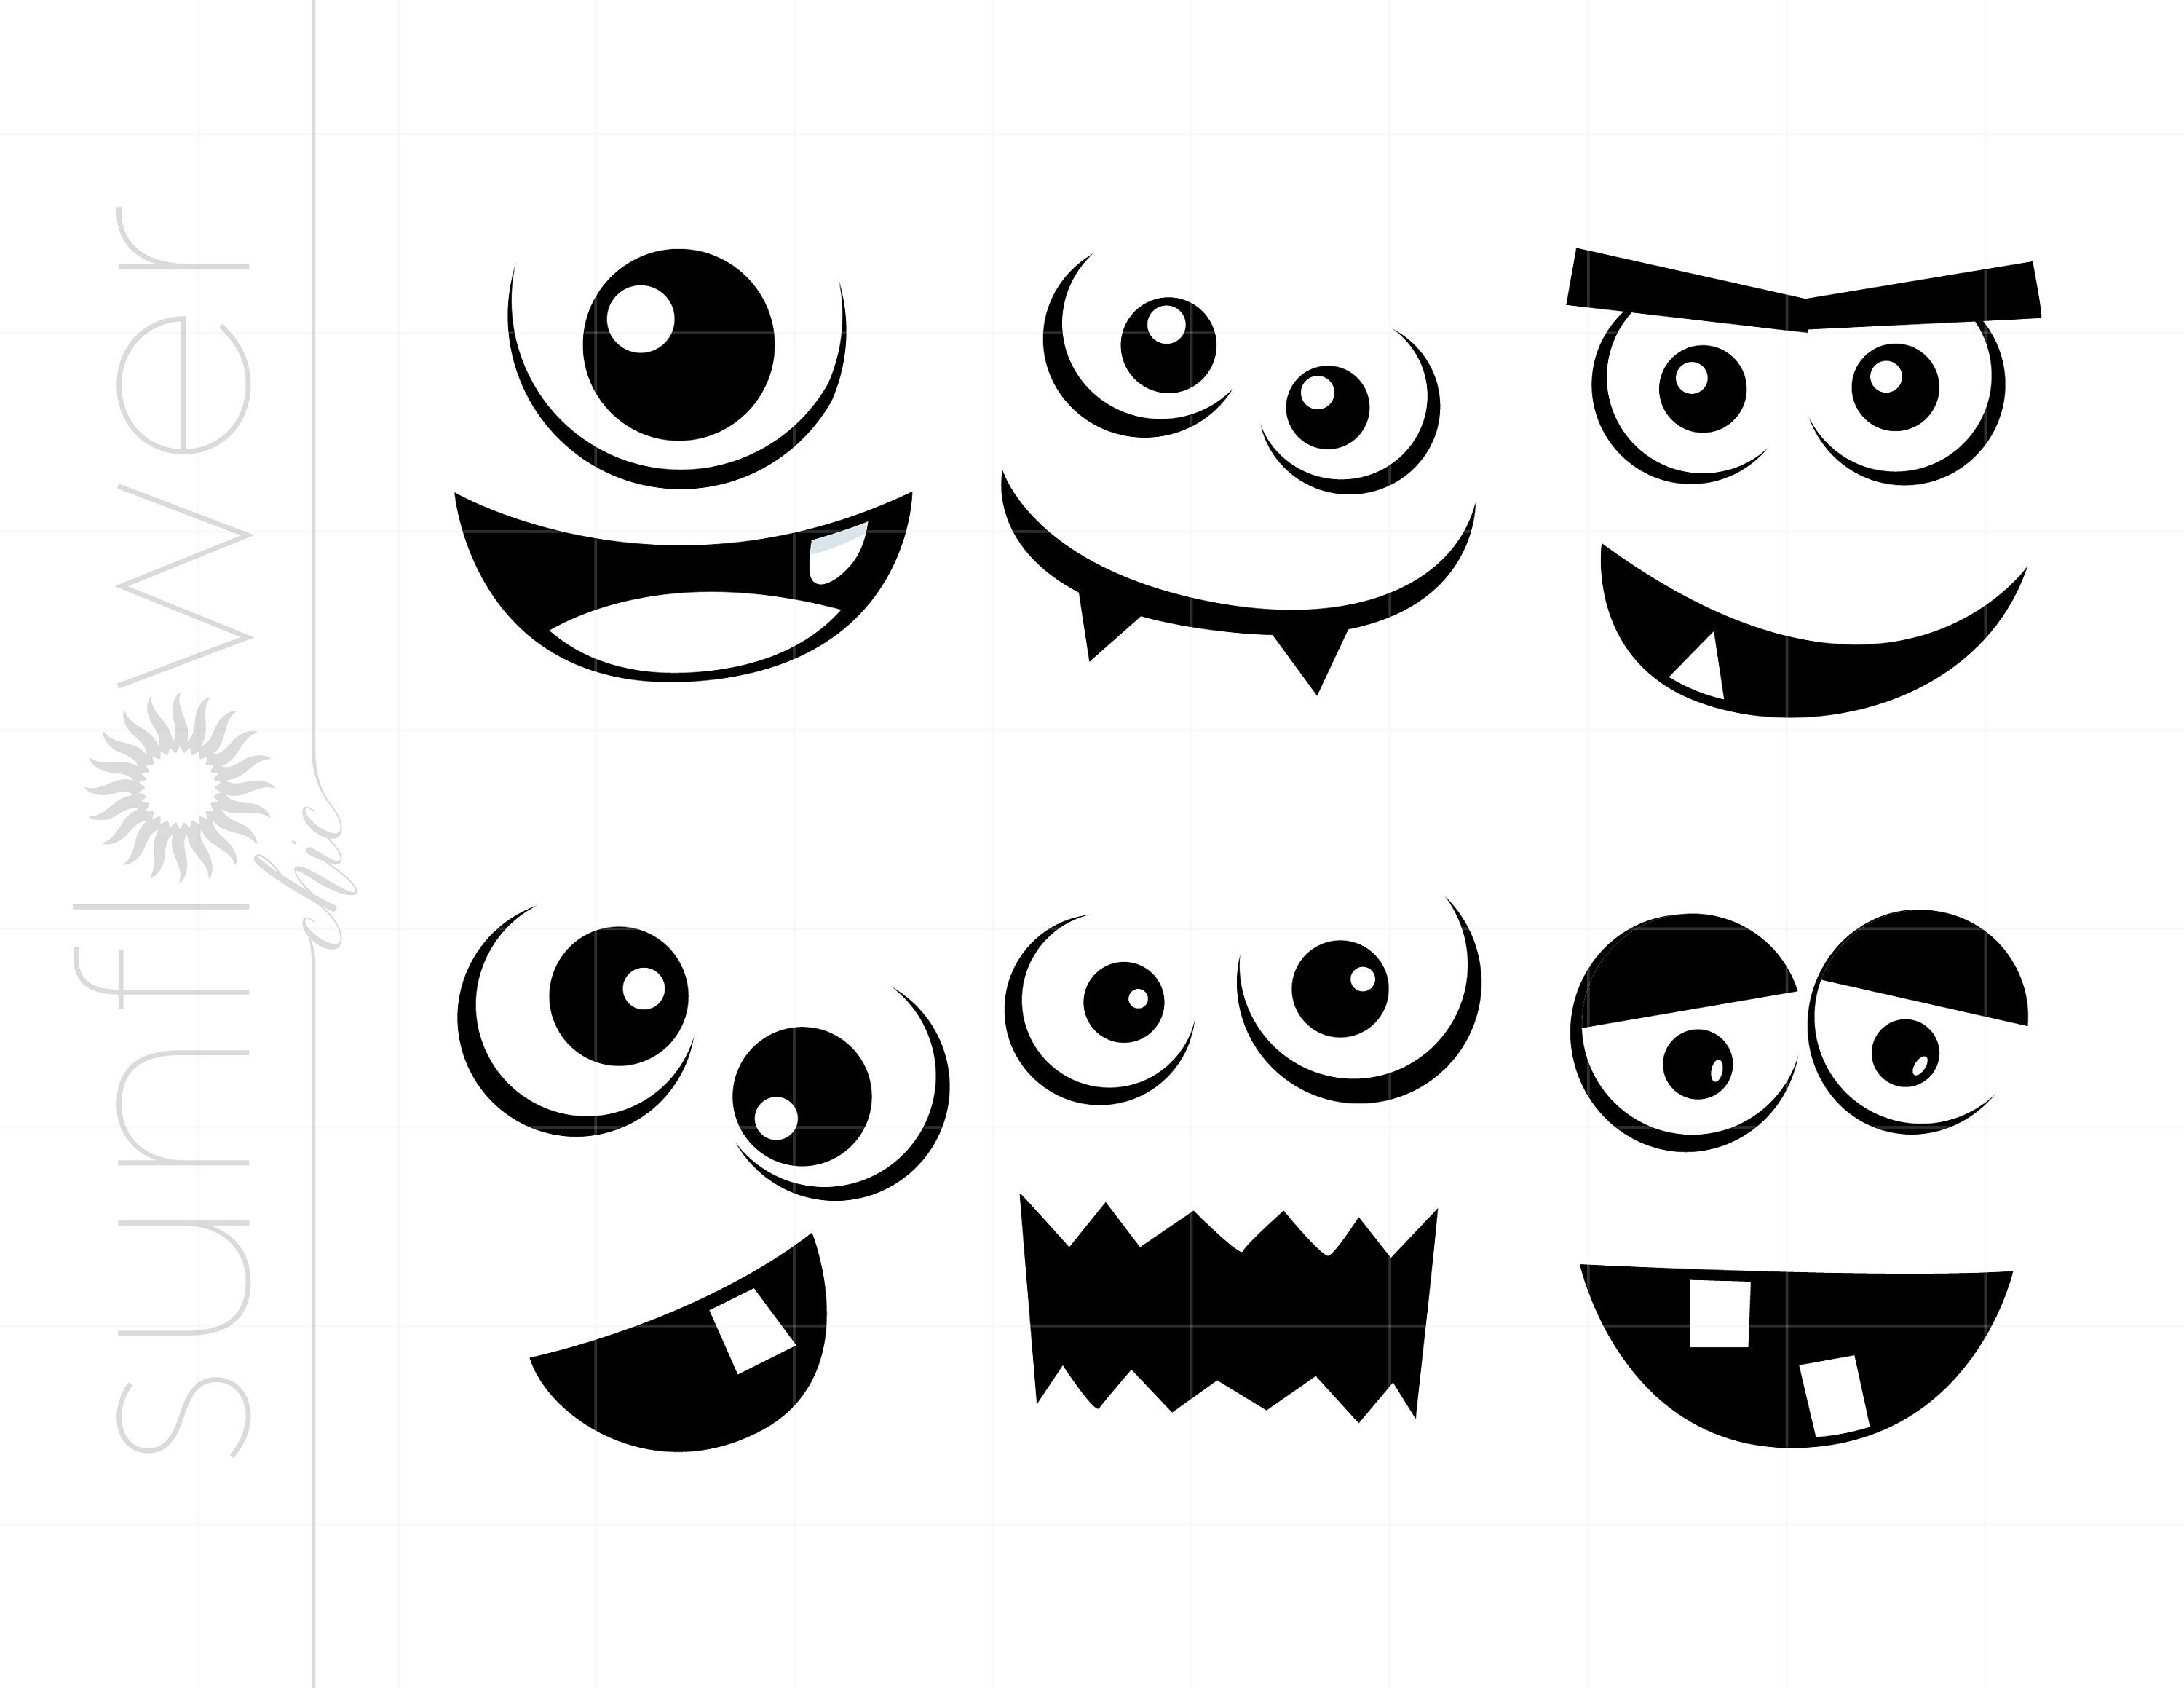 Scary Face PNG - japanese-scary-face scary-face-cartoon scary-face-templates  scary-face-drawings cute-scary-faces vampire-scary-face dinosaur-scary-face  scary-face-black-and-white scream-scary-face scary-face-parts scary-faces-trees  jack-skellington